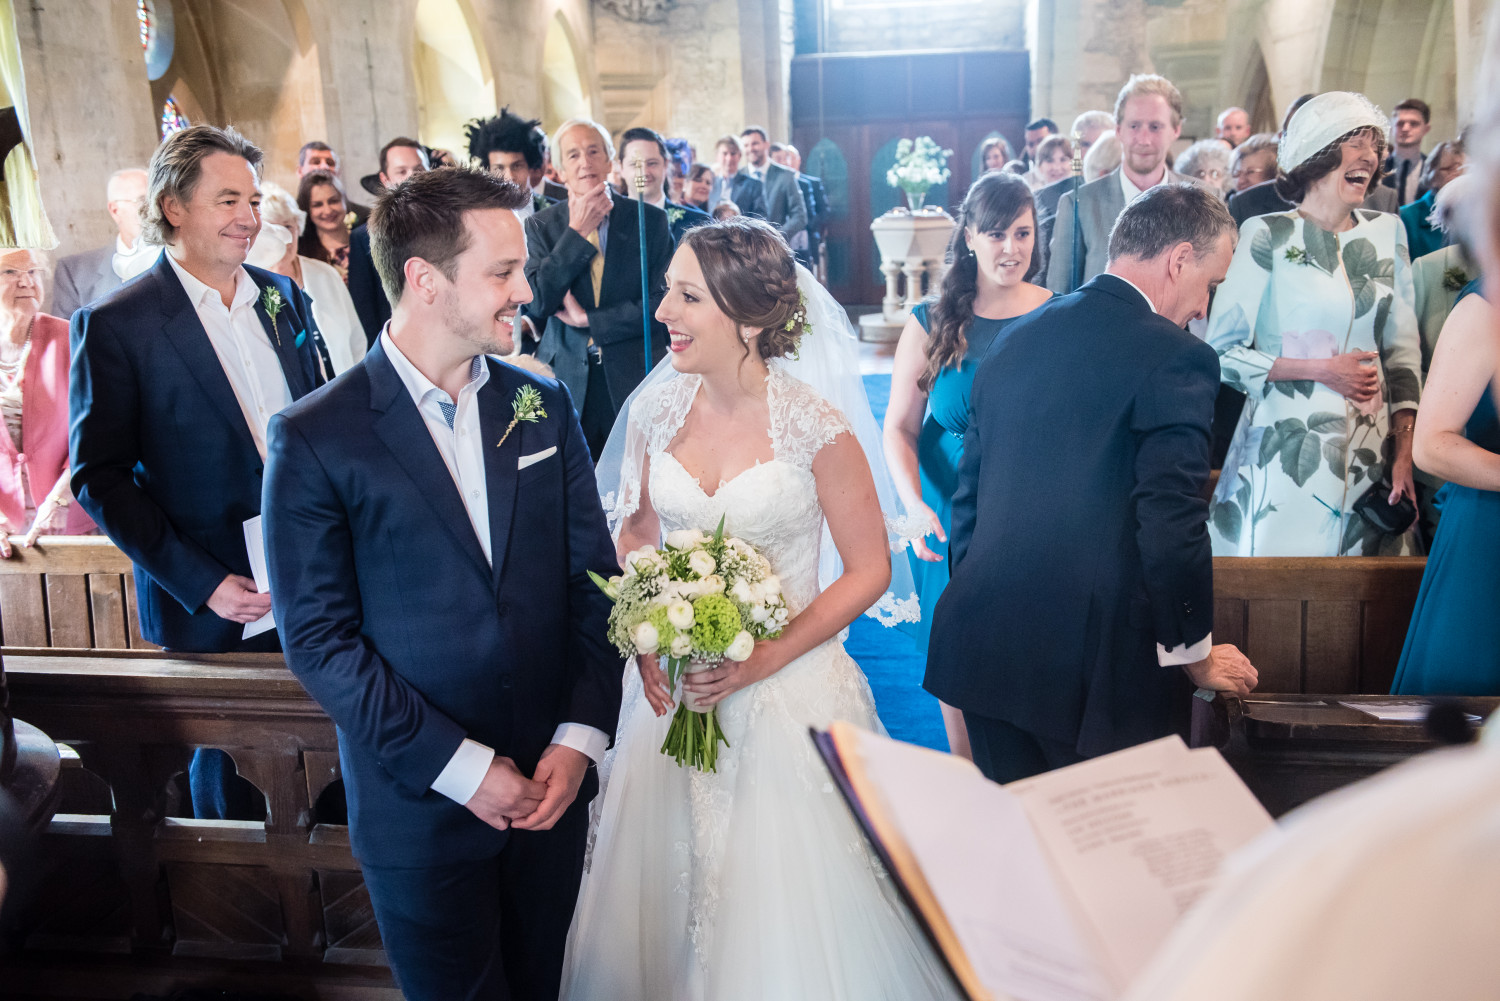 A man in a smart navy suit and a woman in a white wedding dress getting married, whilst their friends and family watch on